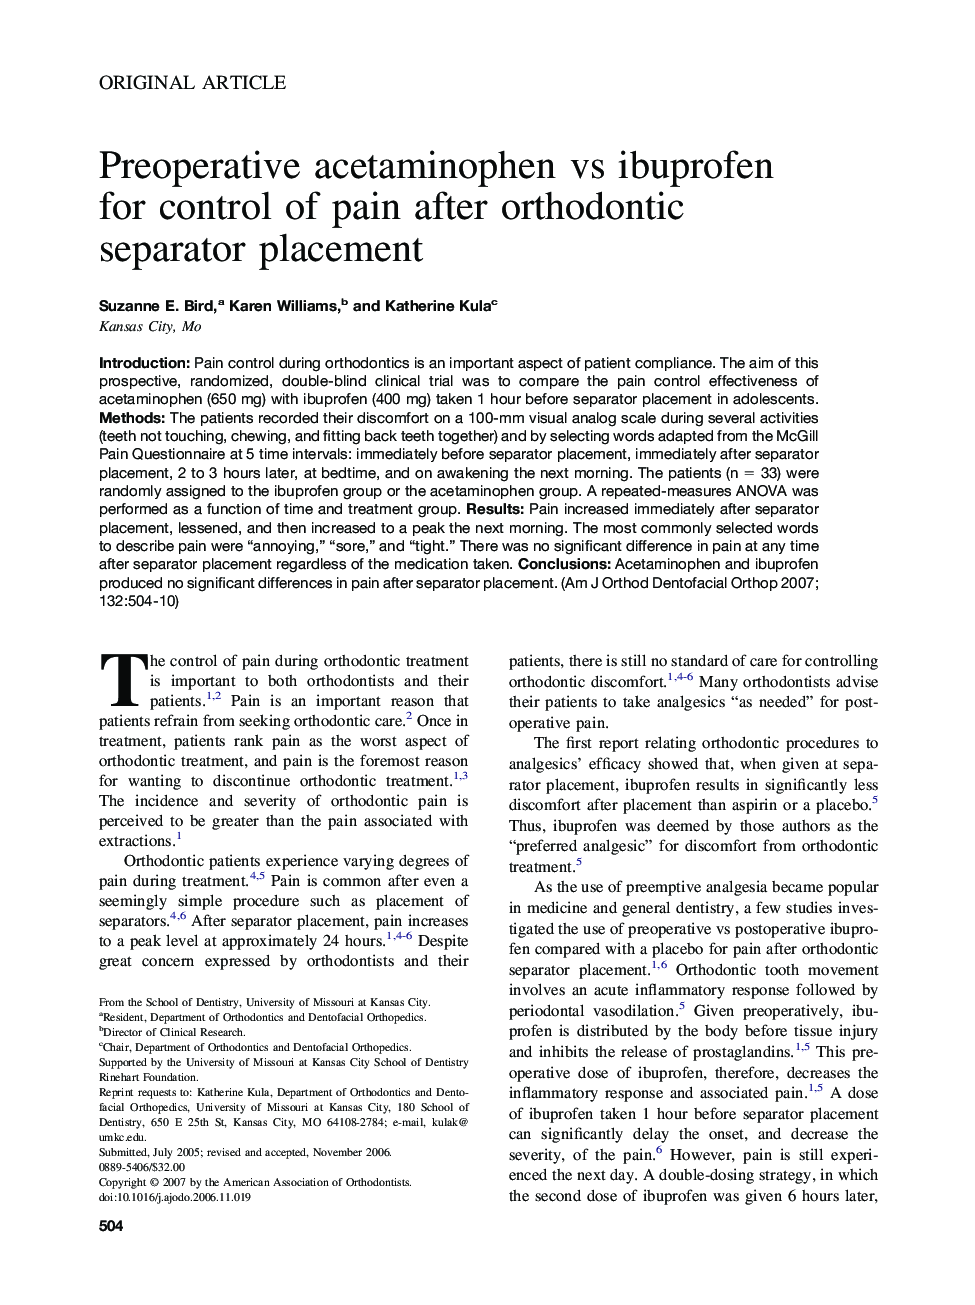 Preoperative acetaminophen vs ibuprofen for control of pain after orthodontic separator placement